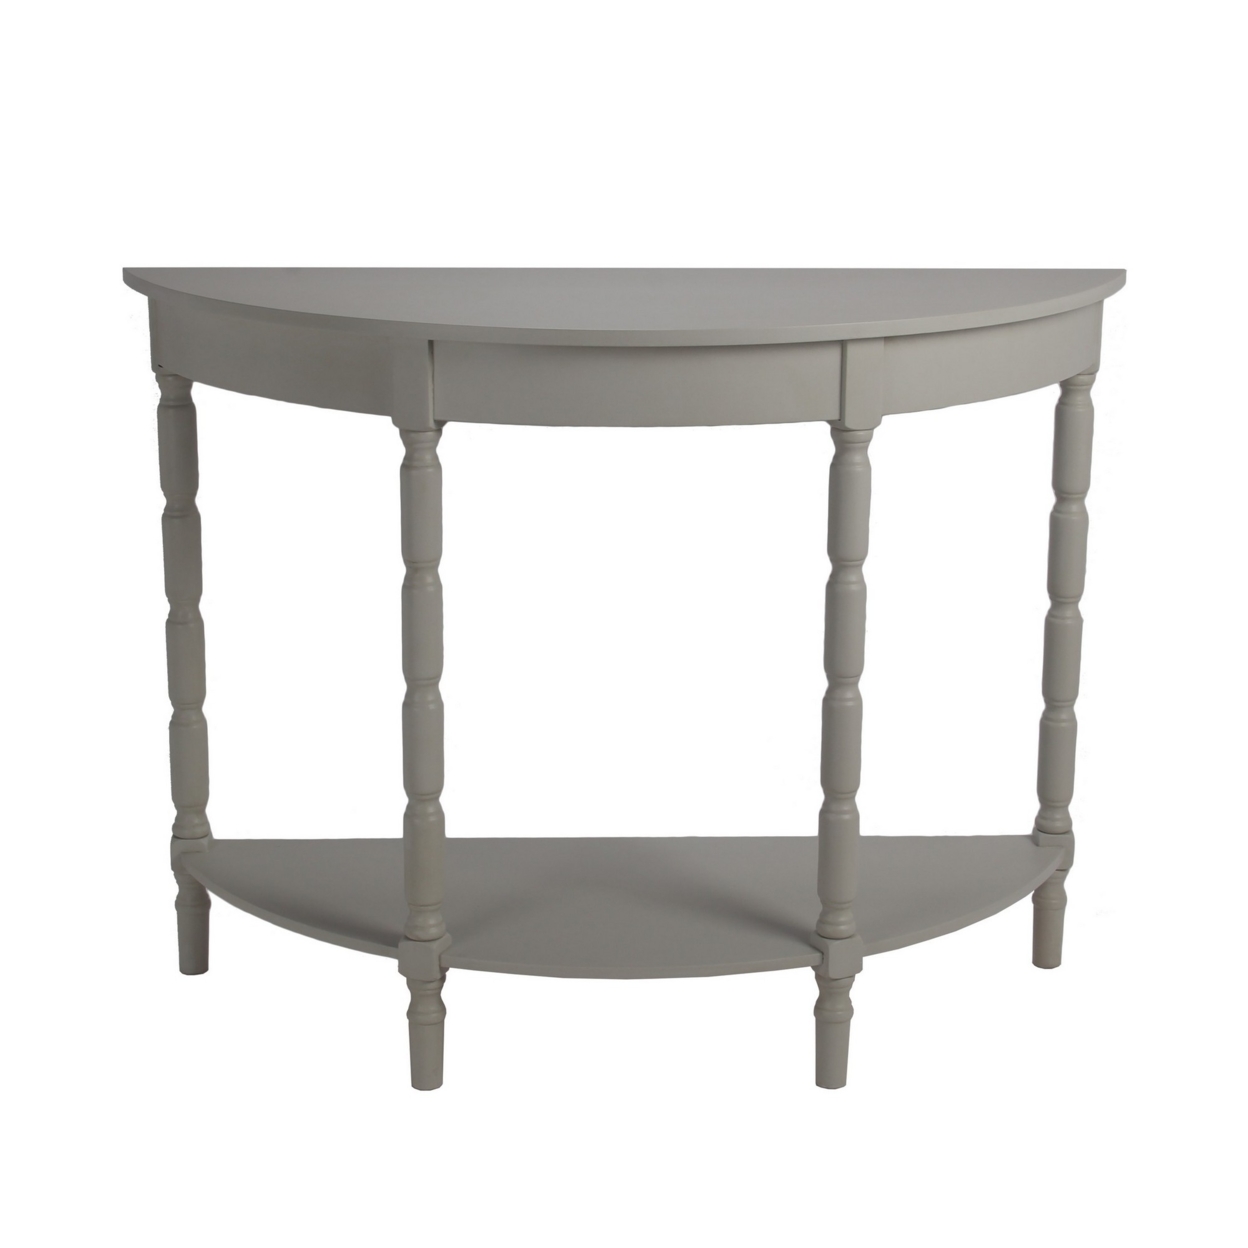 Half Moon Console Table With Open Shelf And Turned Legs, Light Gray- Saltoro Sherpi